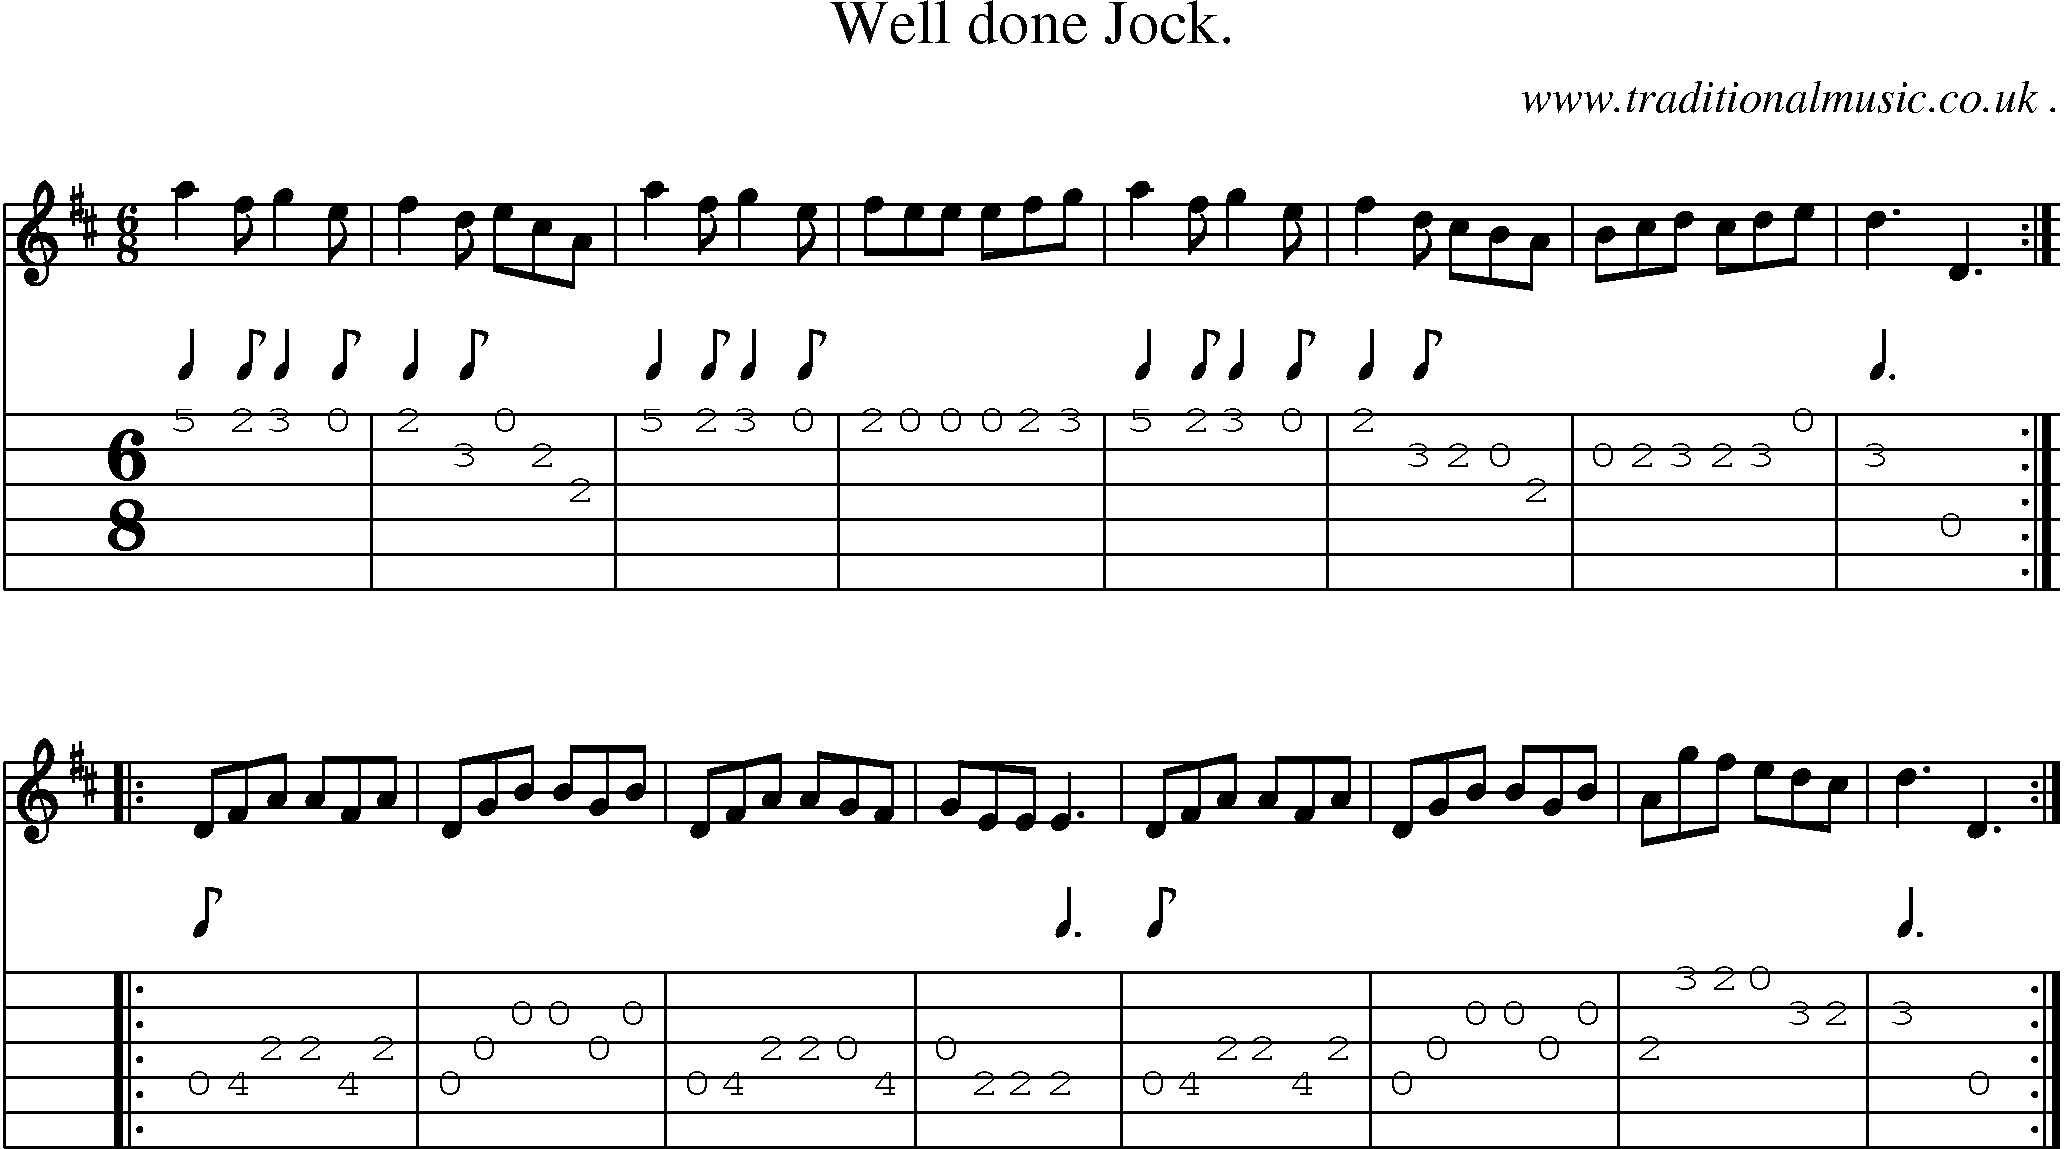 Sheet-Music and Guitar Tabs for Well Done Jock